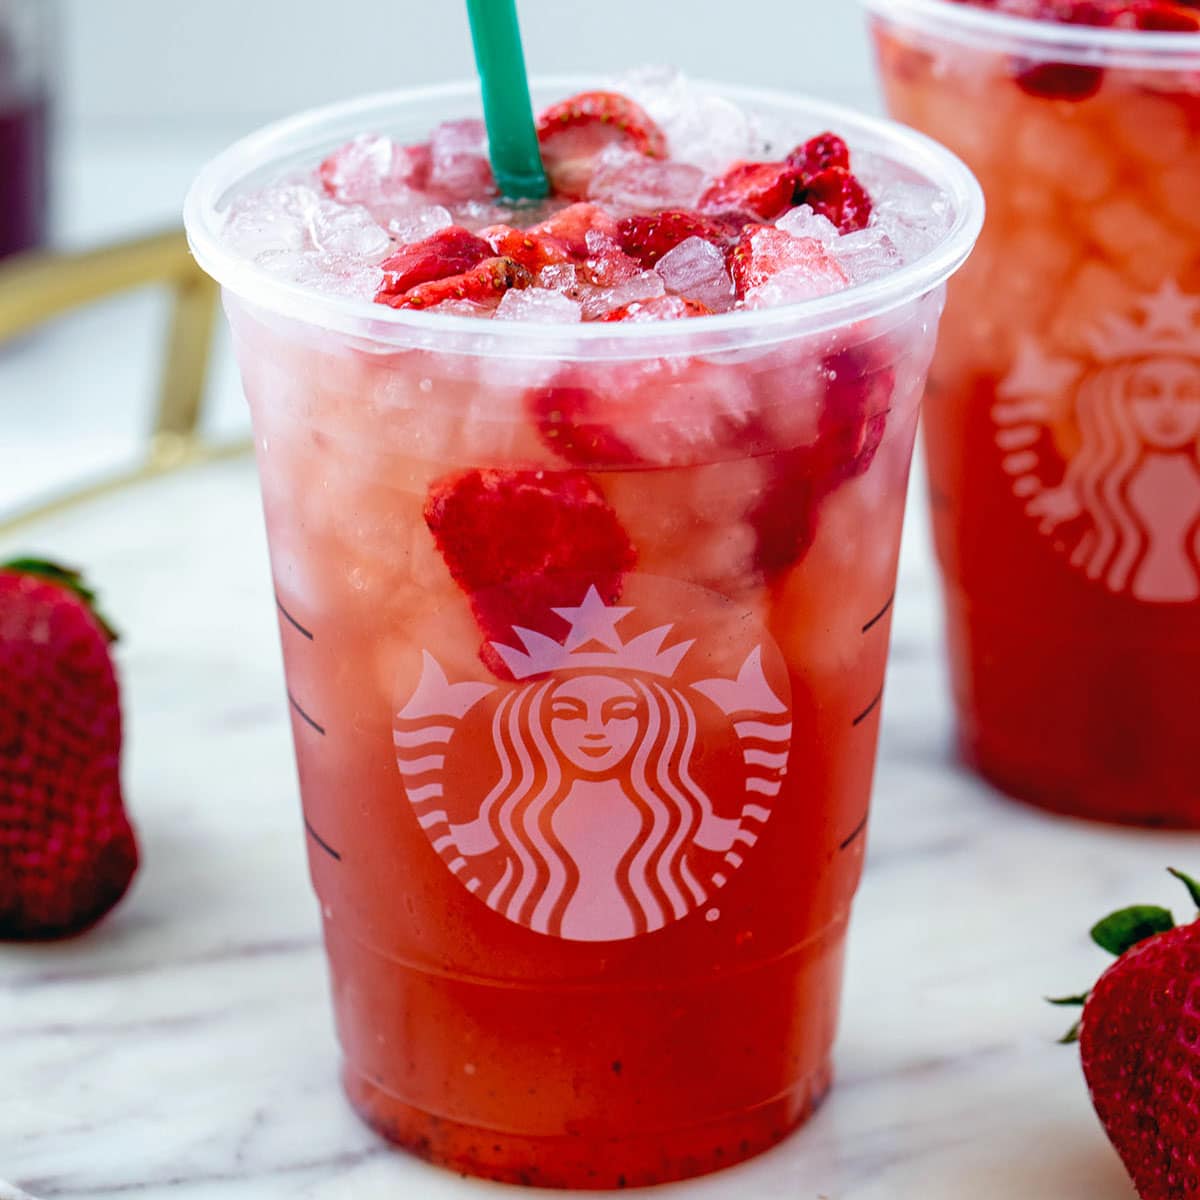 How Much is a Grande Strawberry Acai Refresher?